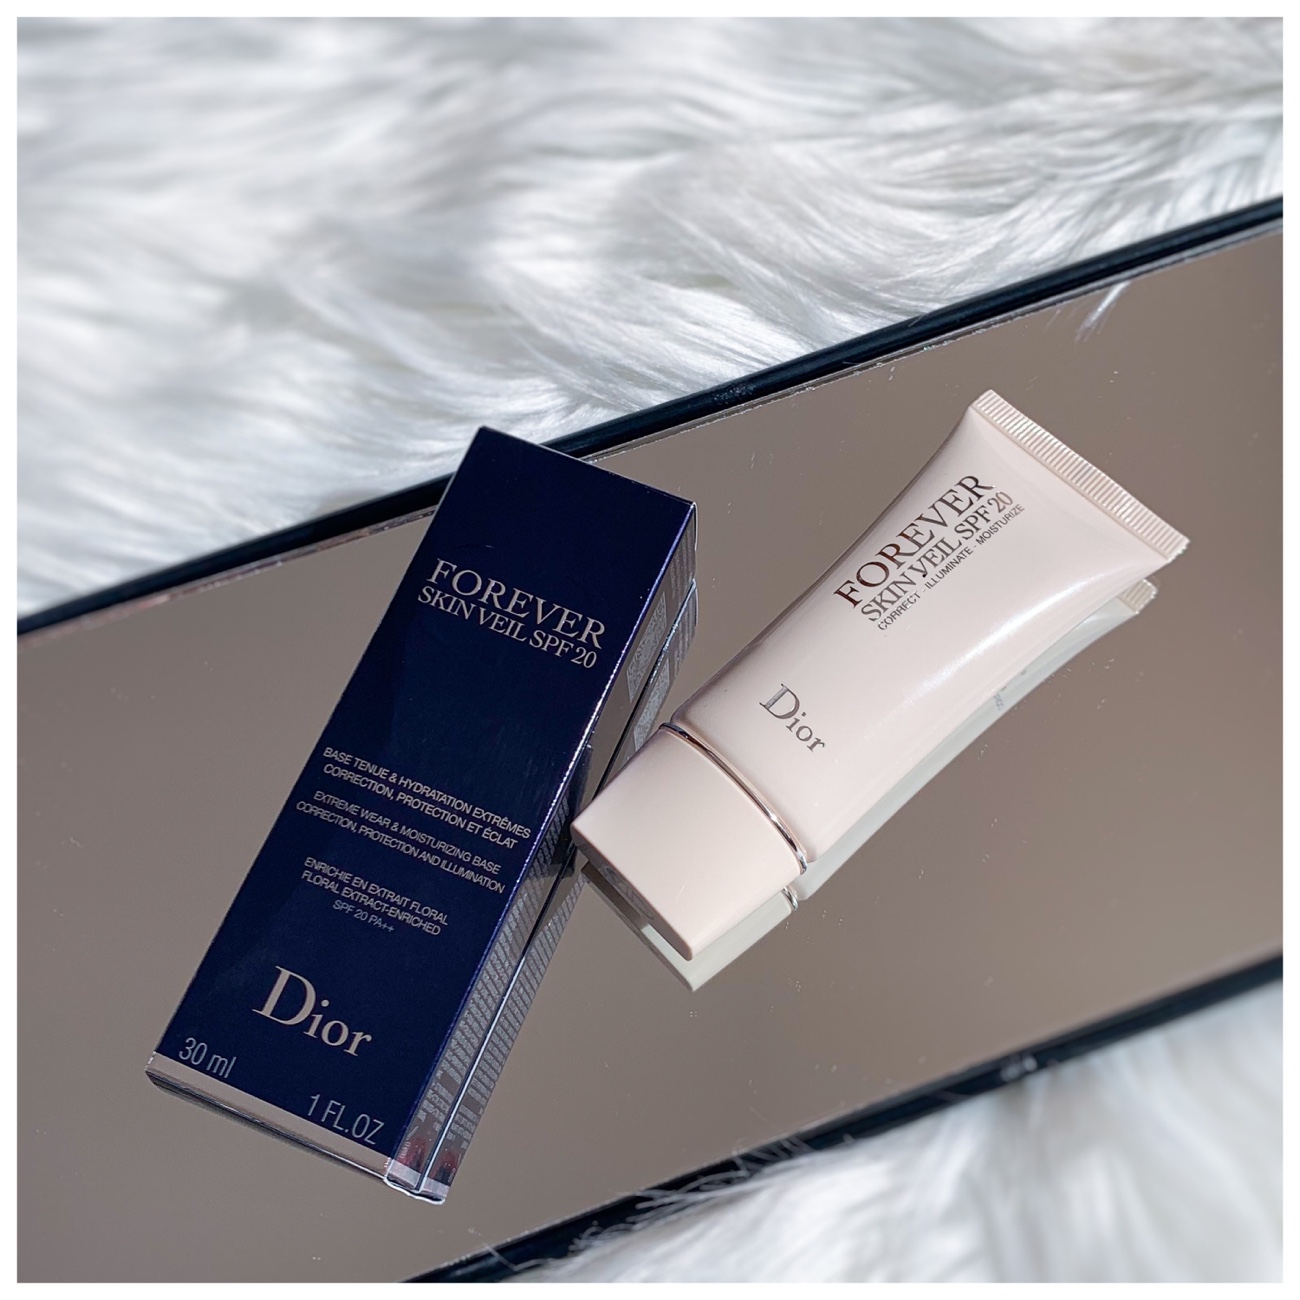 NEW Dior Skin Veil SPF20 - correction, protection and illumination in one